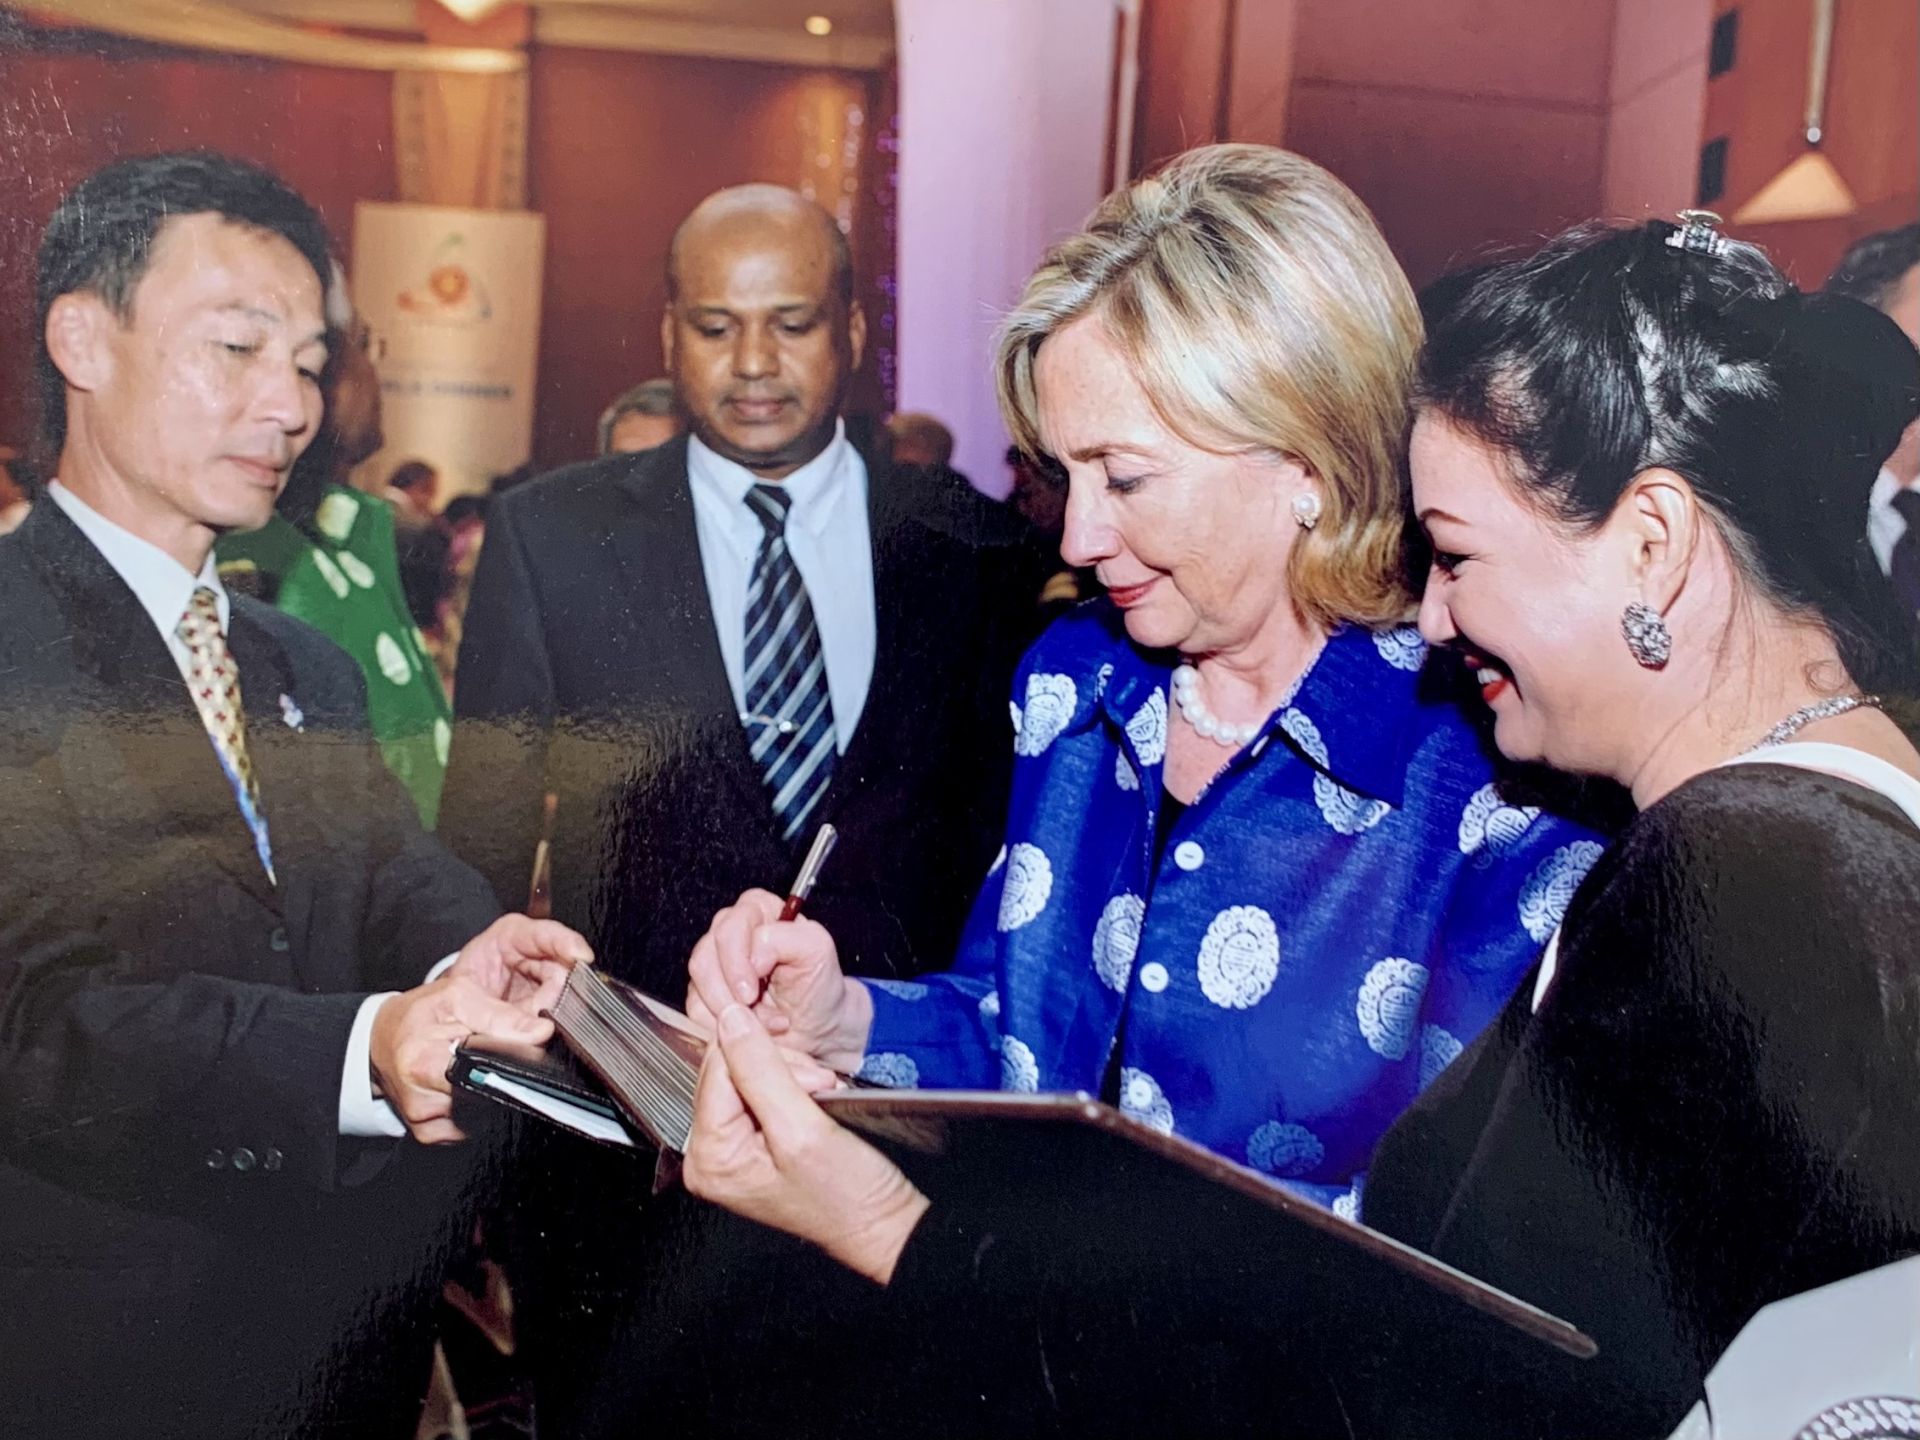 A photo with U.S. Secretary of State Hillary Clinton at the APEC Foreign Ministers' Meeting in 2006.